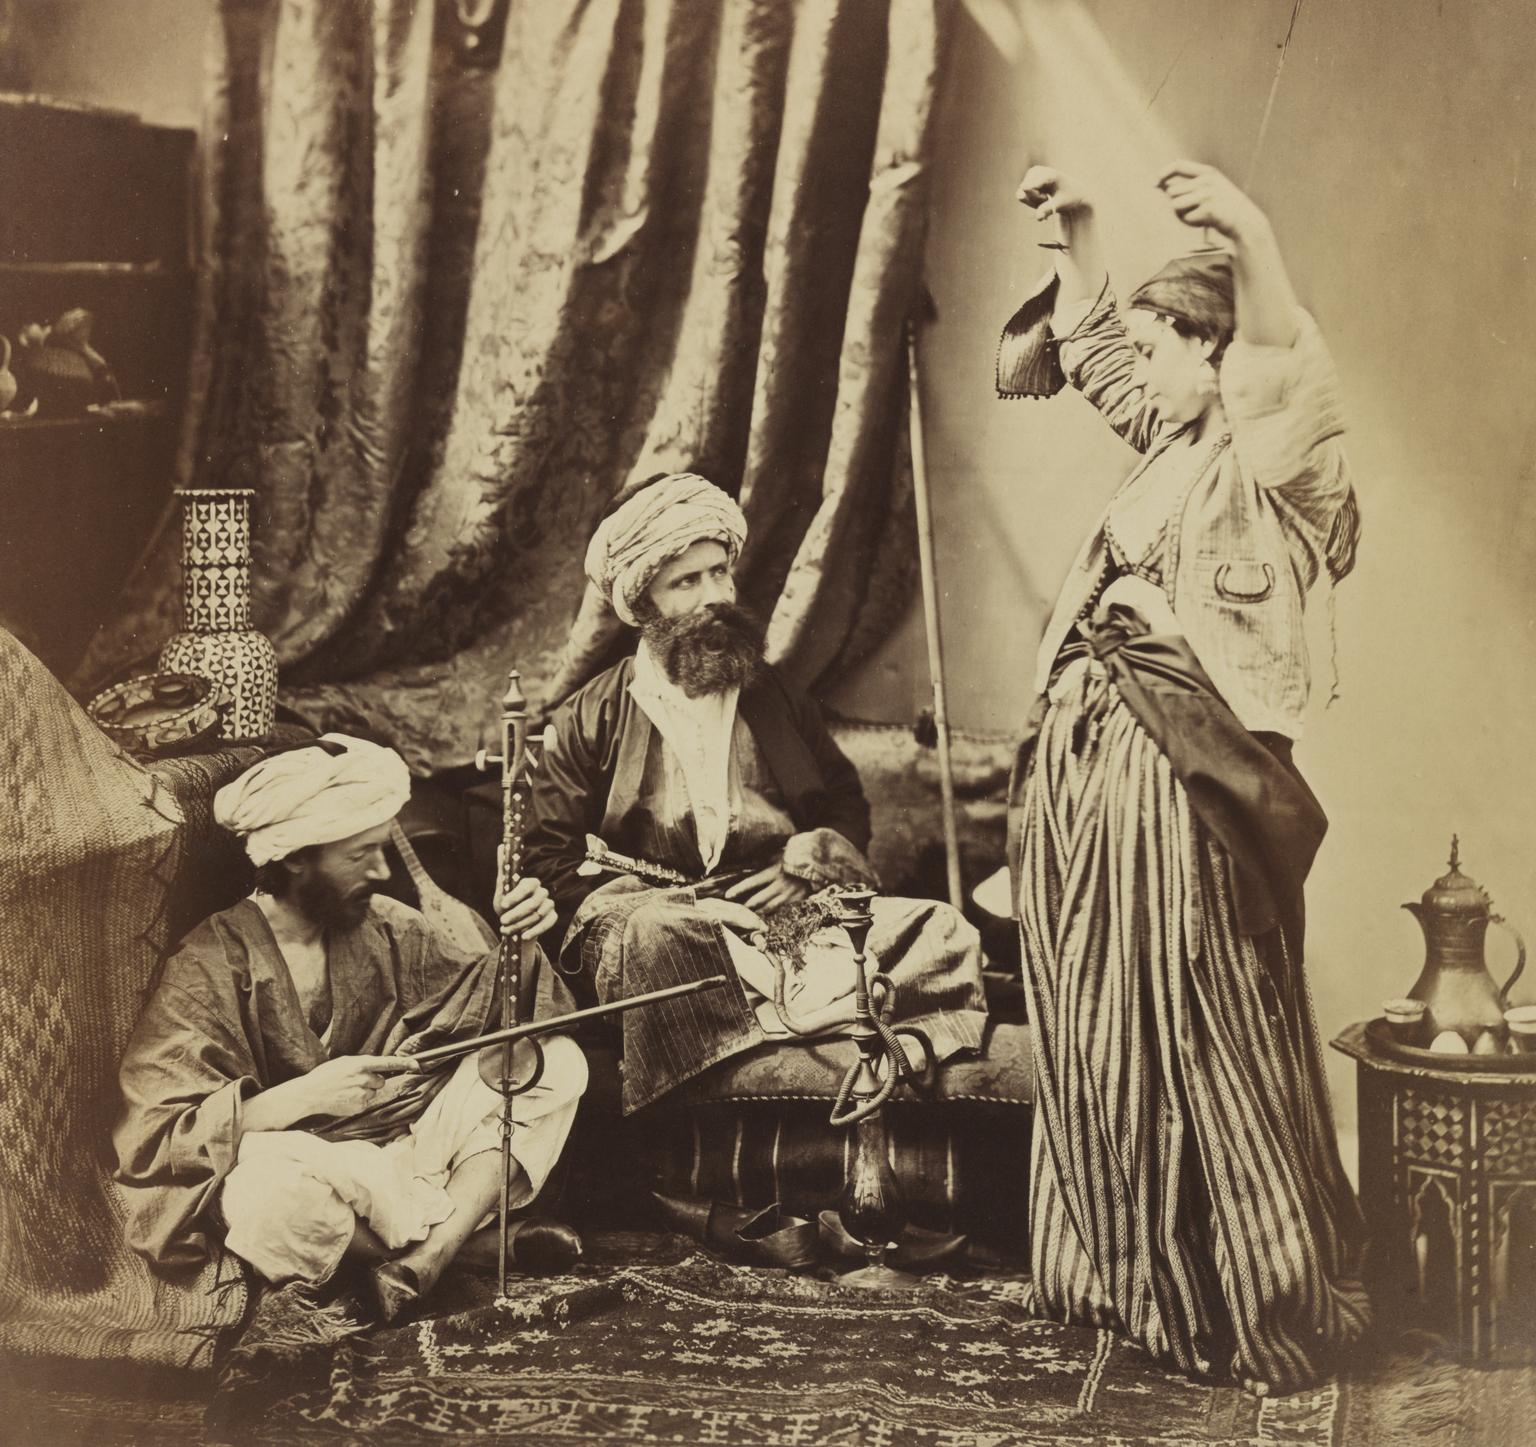 Pasha and Bayadère, 1858. Roger Fenton. Science Museum Group collection